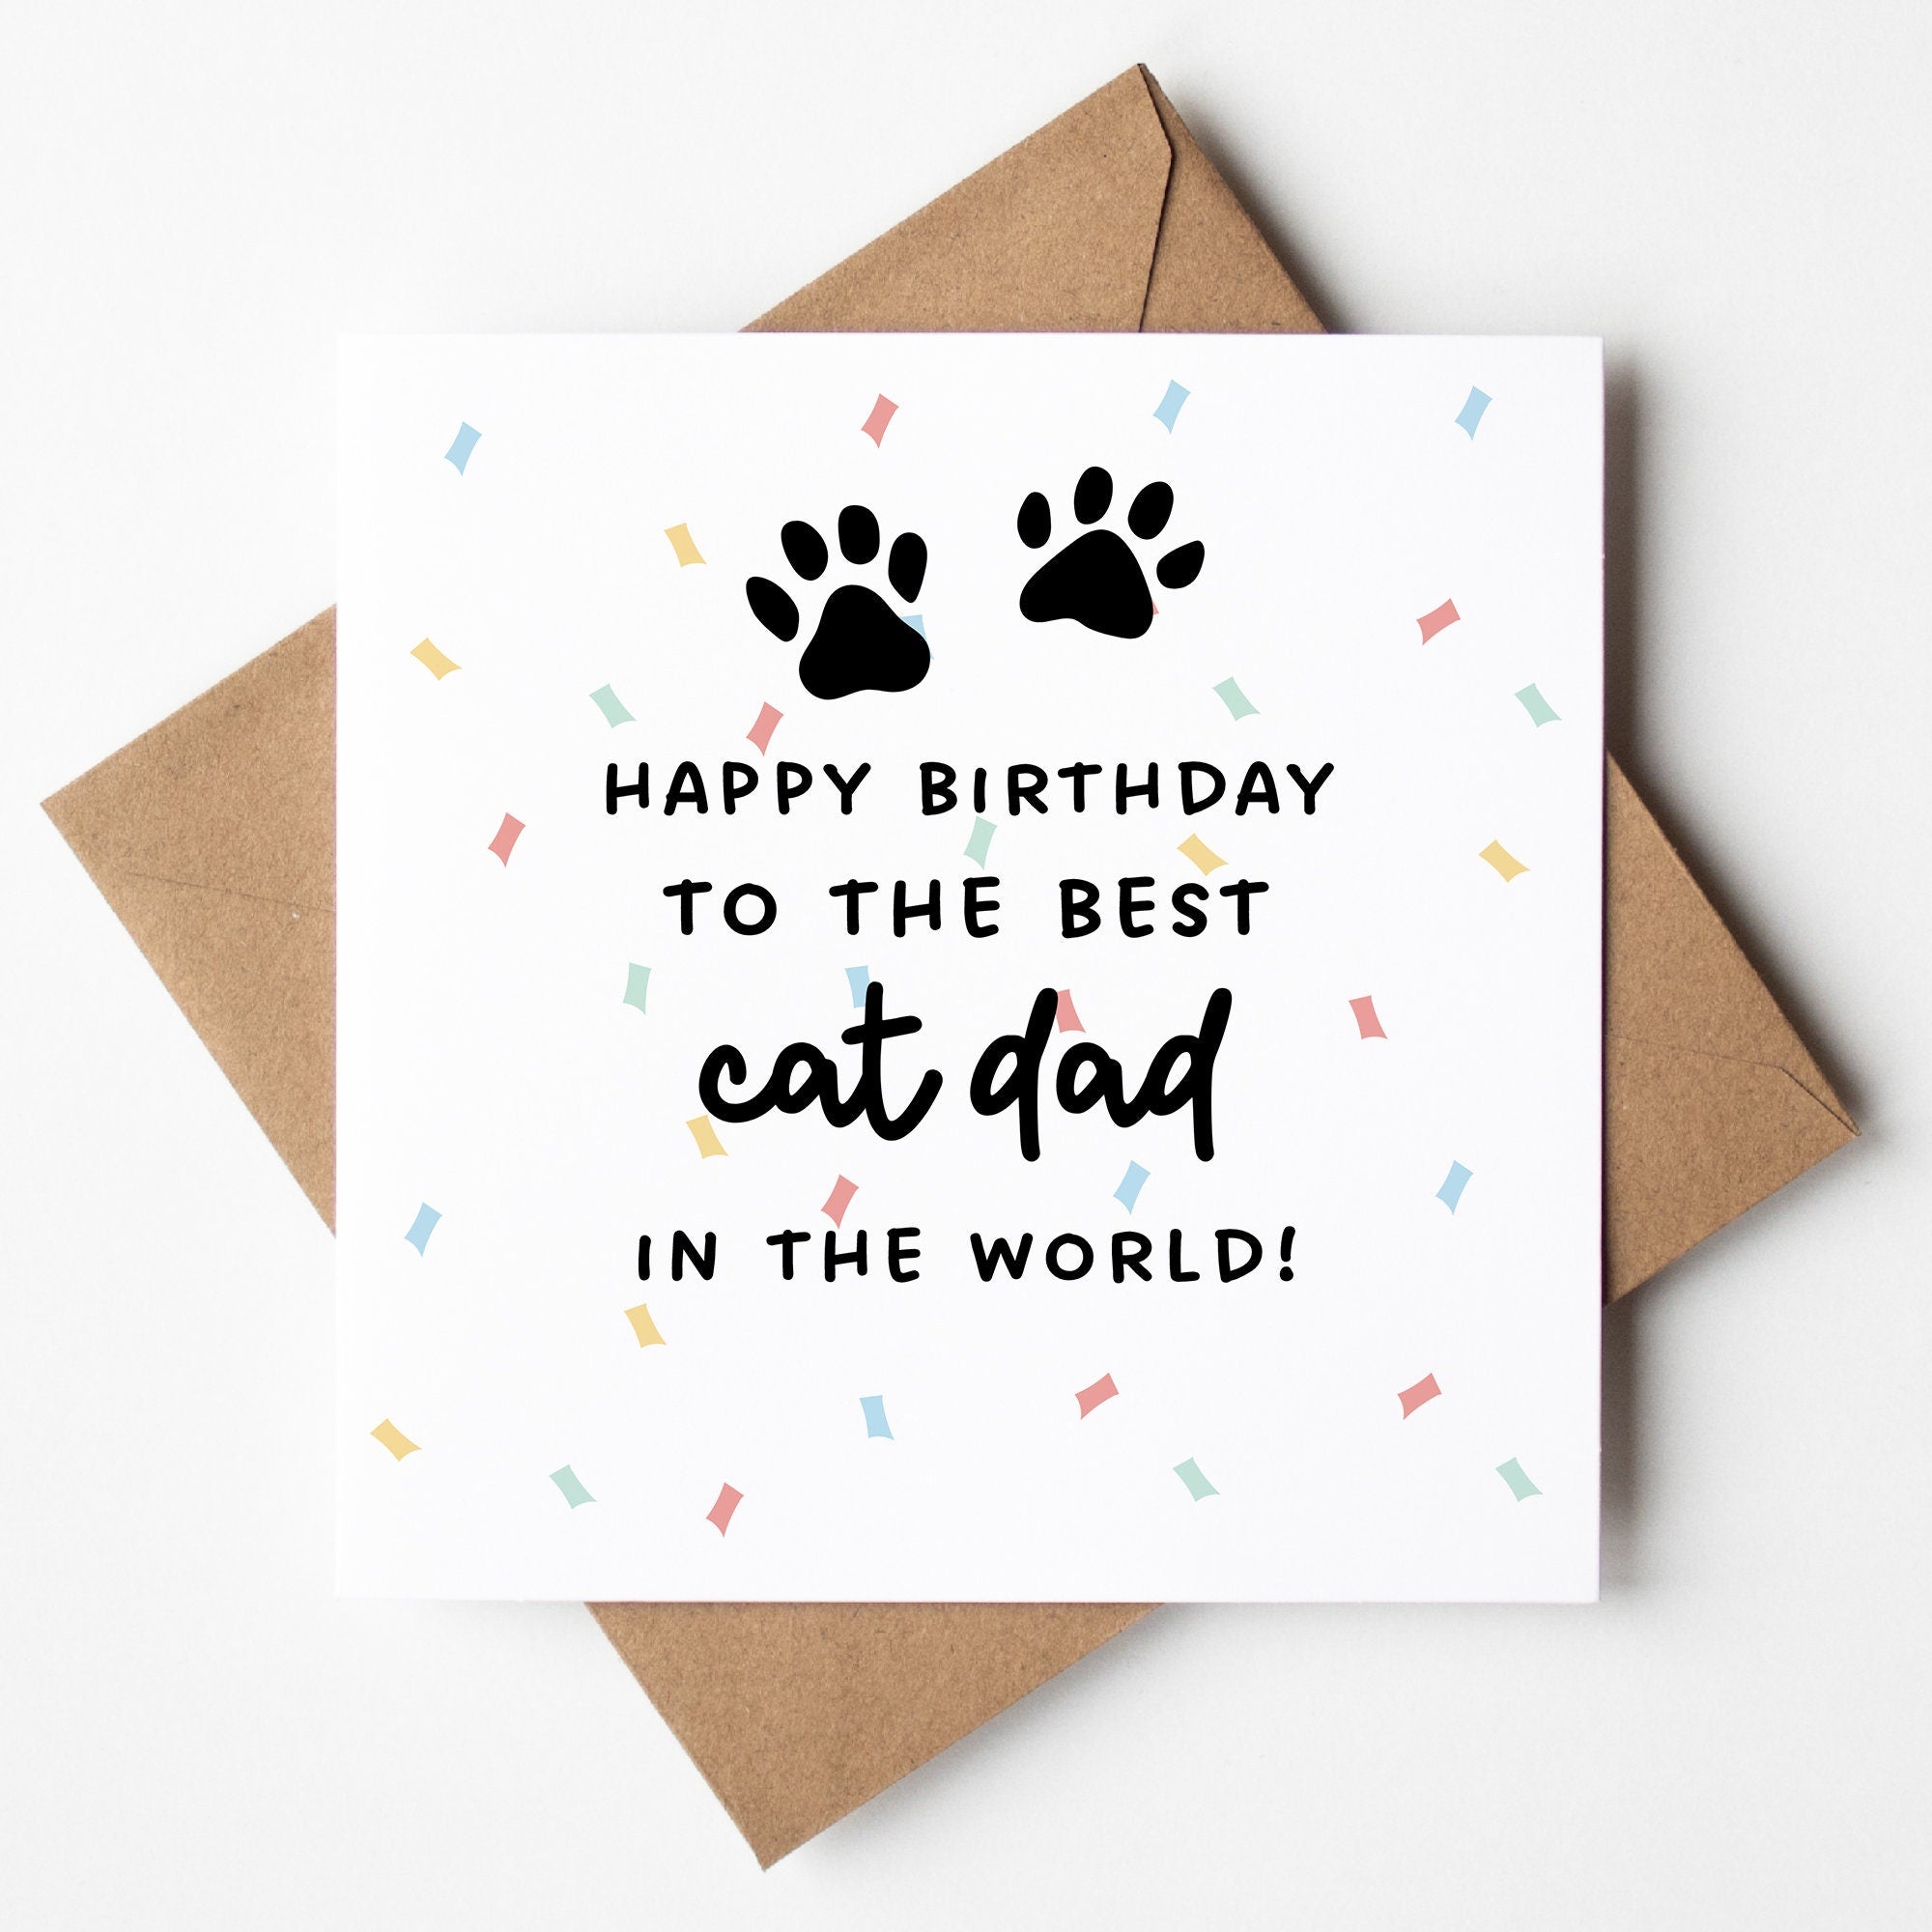 Happy Birthday To The Best Cat Dad In The World Birthday Card - Funny Card From the Cat - Husband Cat Birthday Card